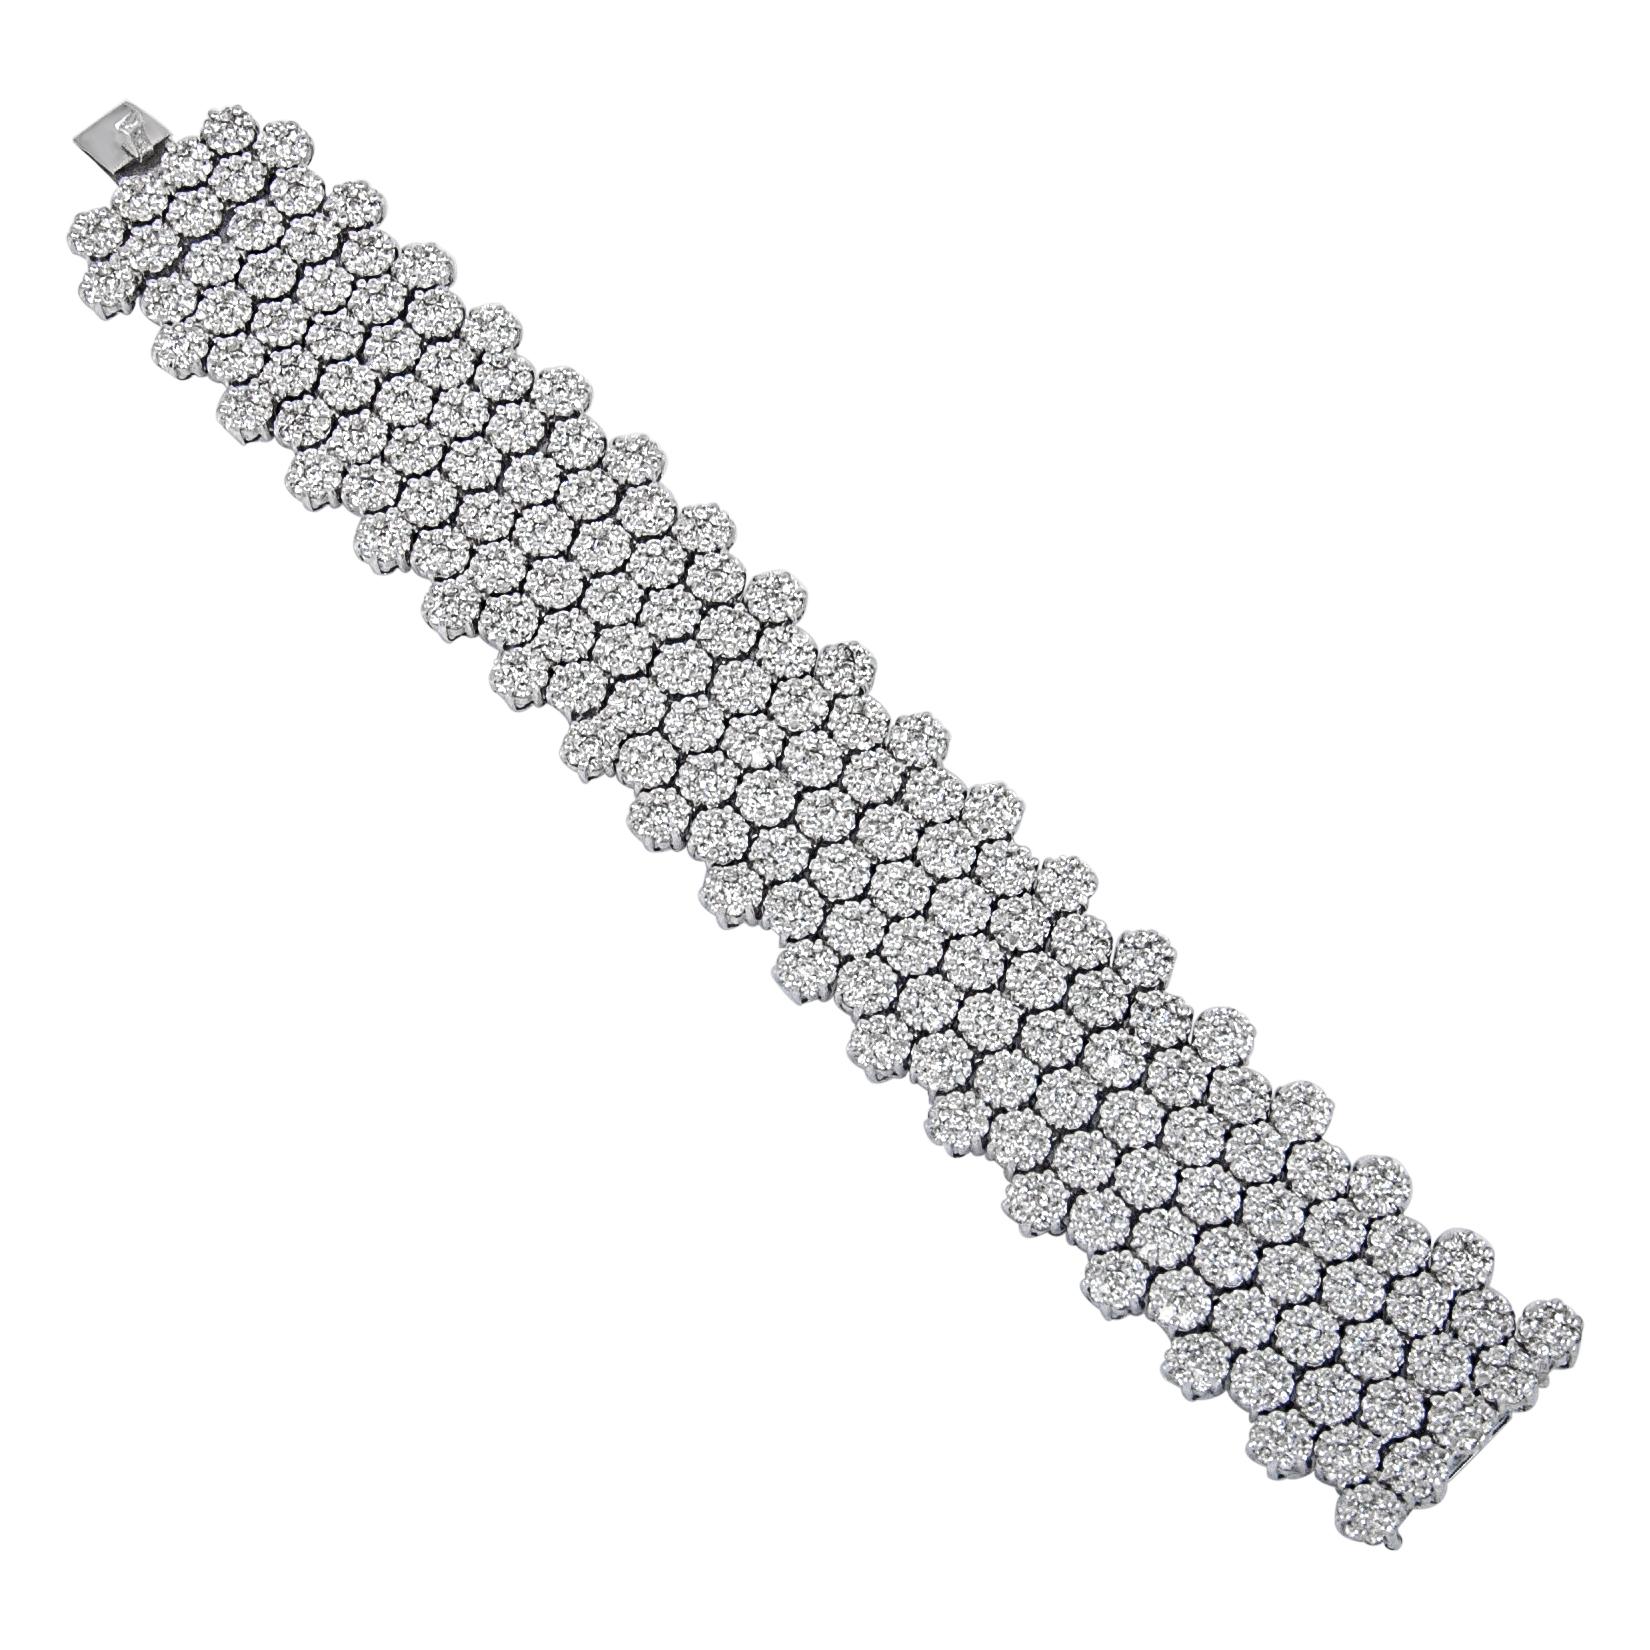 An impressive wide bracelet, handcrafted in 18 karat white gold with 162 ensembles of round shape cluster diamonds, each cluster has 7 diamonds totaling 1134 diamonds in all with total weight of 23.12 carats of round diamonds G-H color VS1 clarity.